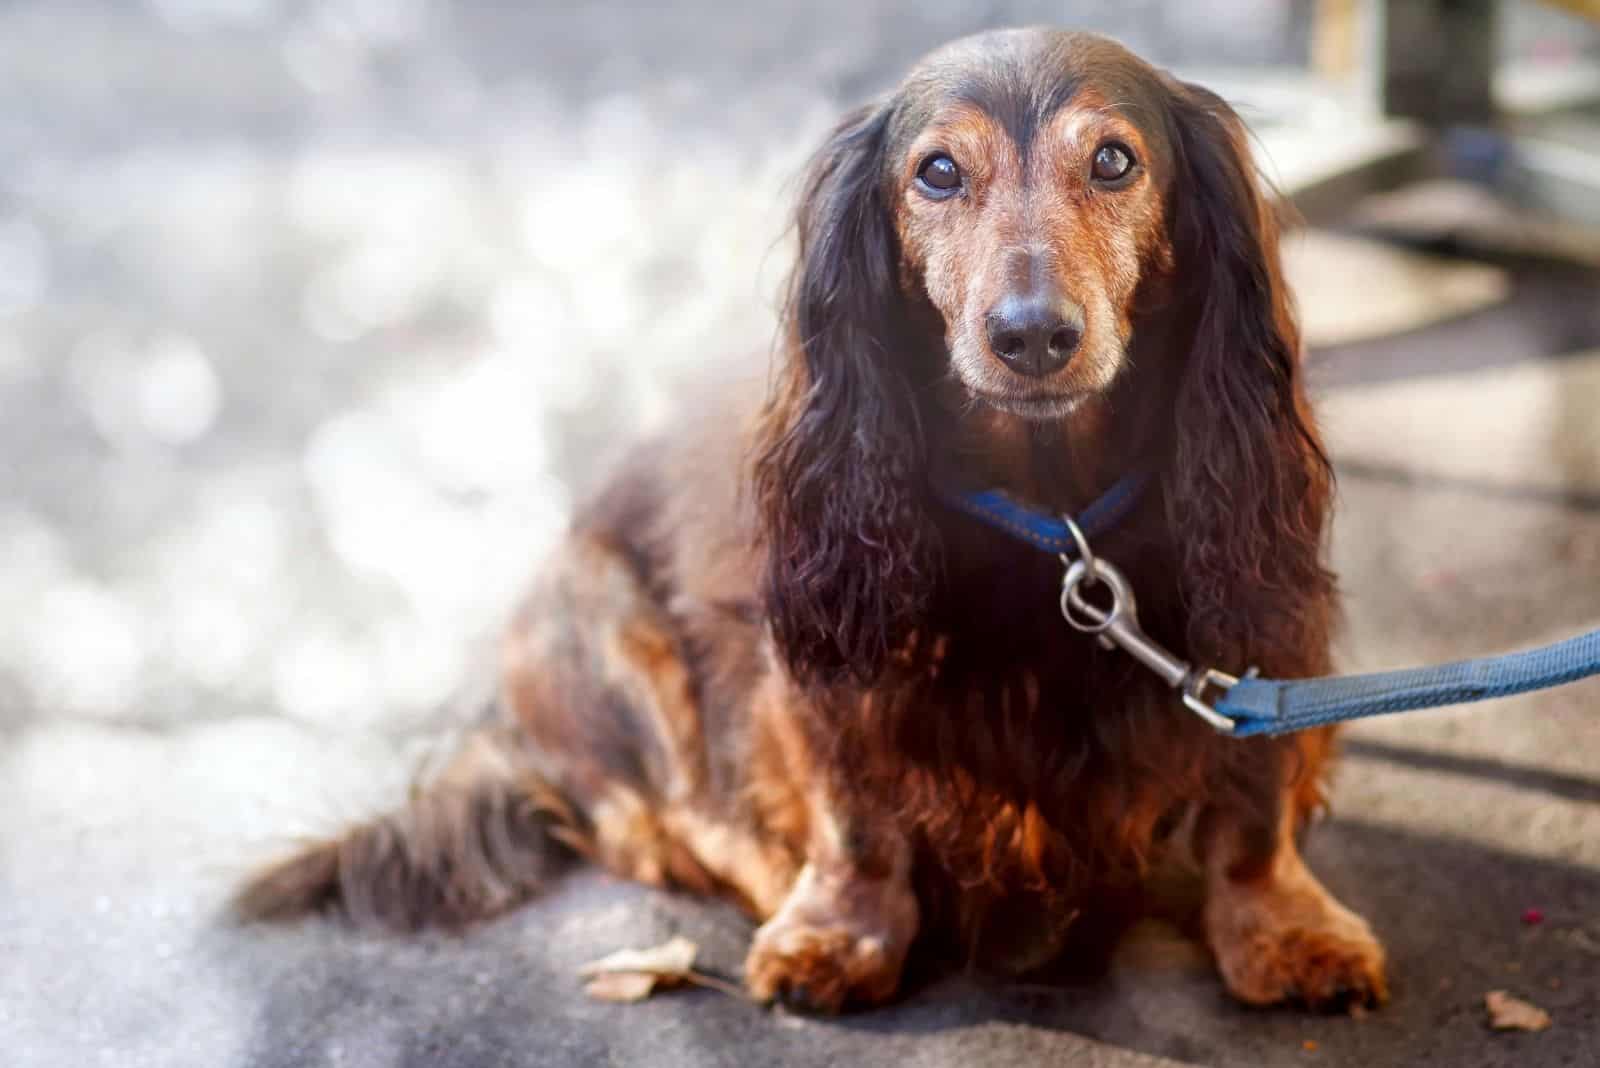 old dachshund waiting for the owner held on leash